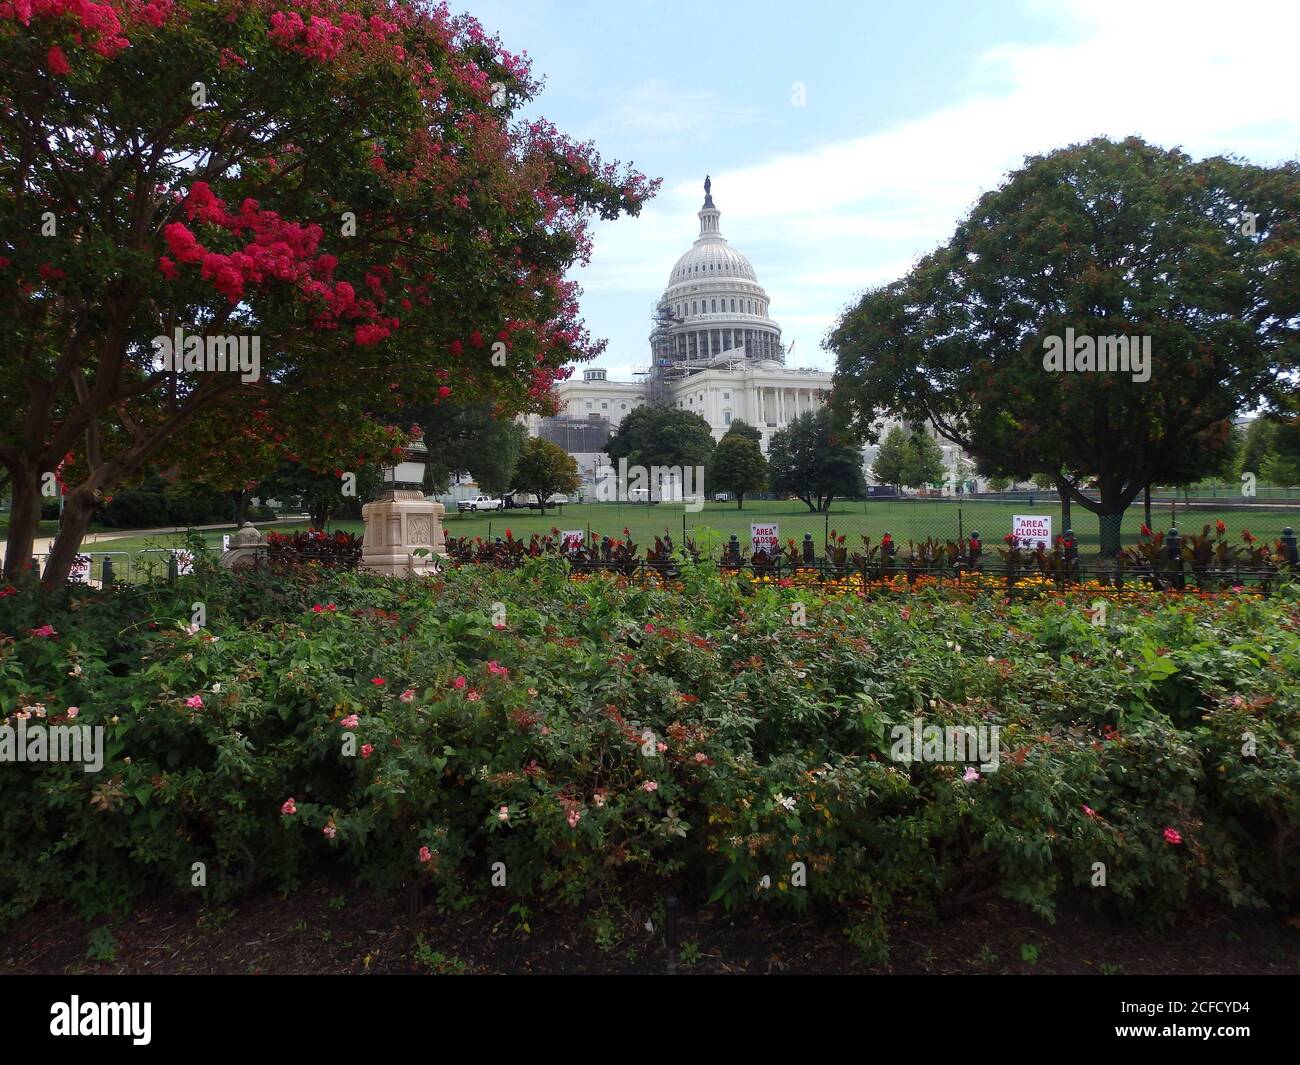 The US Capitol Building, with gardens in the foreground, Washington DC, United States Stock Photo